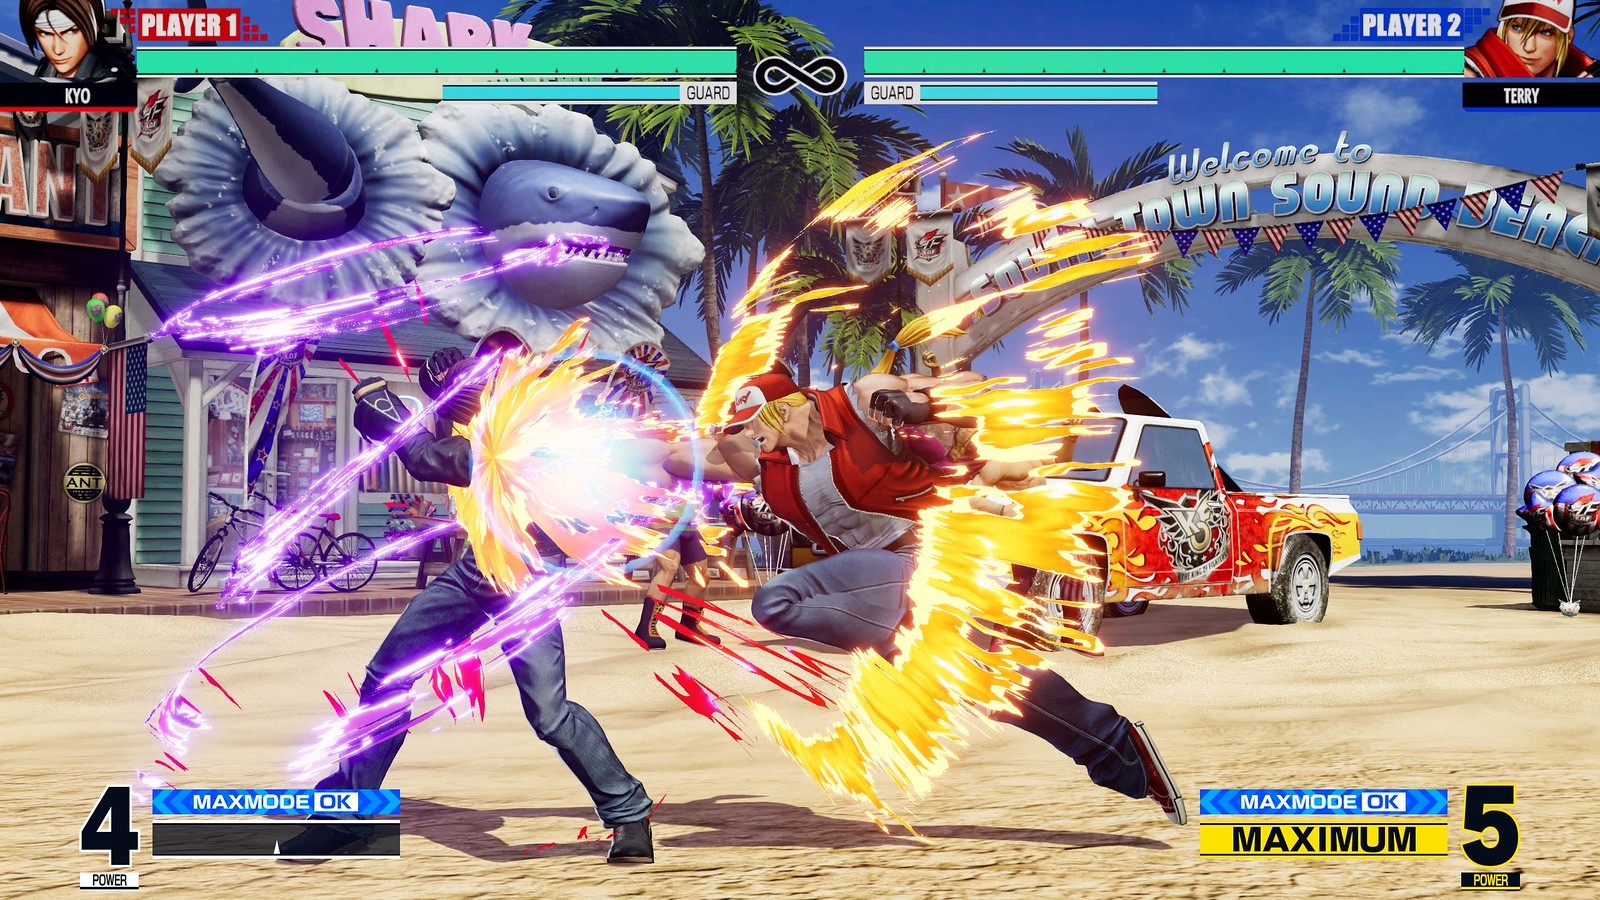 You can now try King of Fighters XV for free on PS4 and PS5